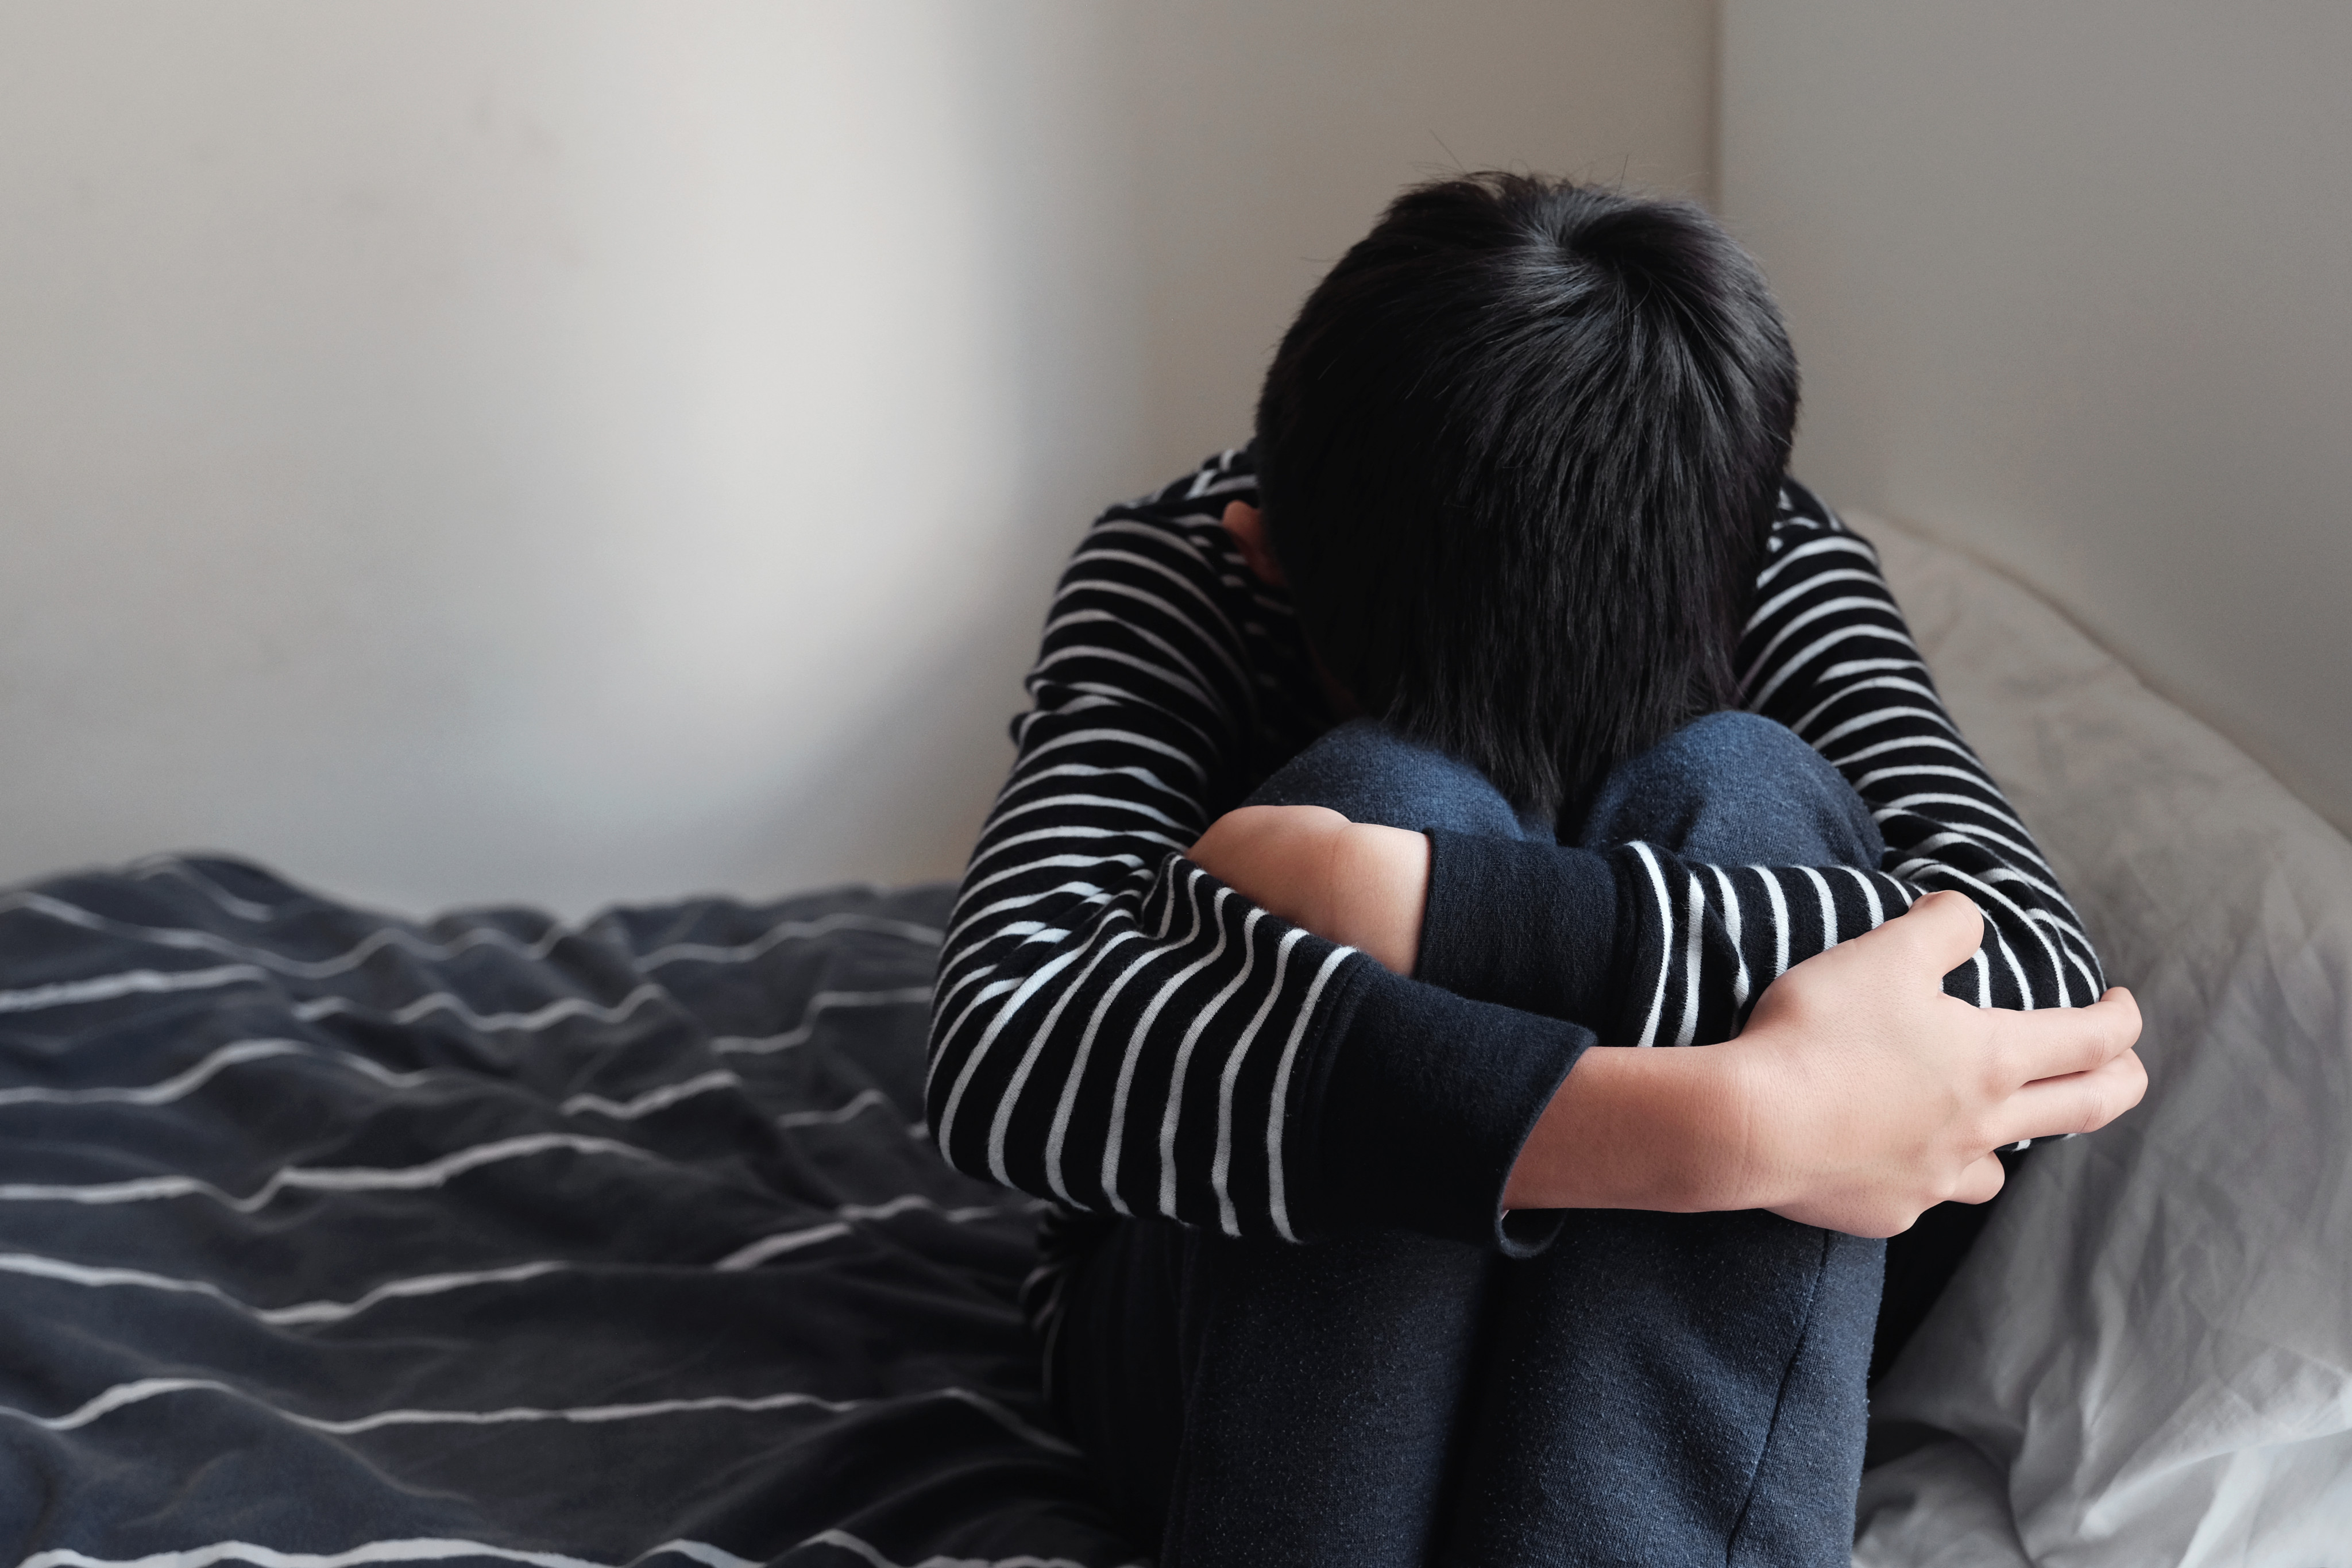 A recent case of alleged family violence in Hong Kong involving two special needs youths has shone the spotlight on help services. Photo: Shutterstock Images